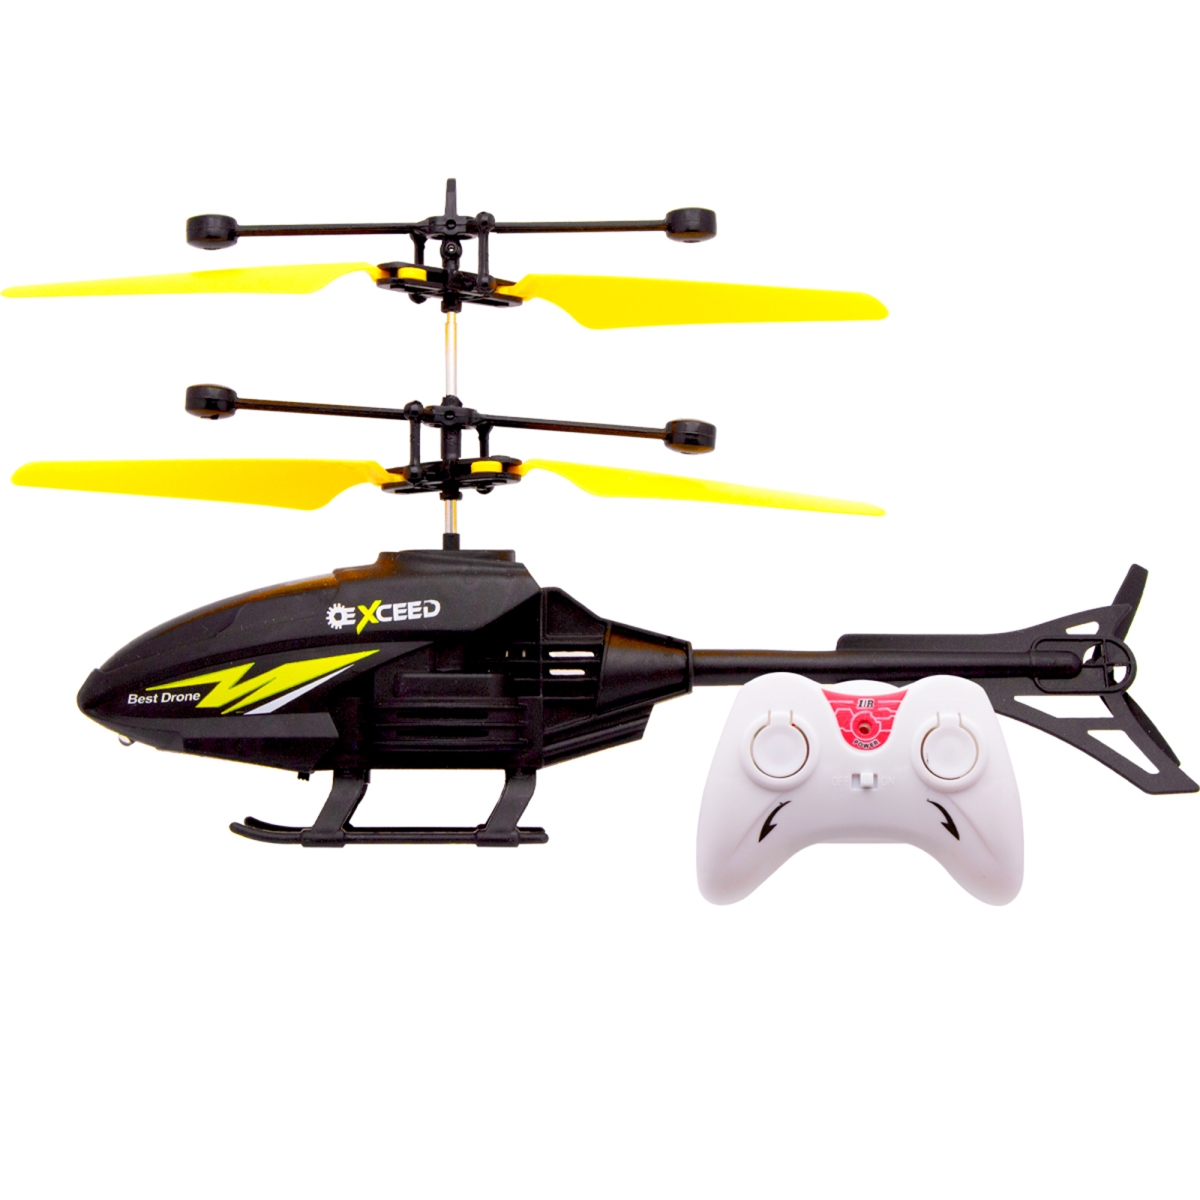 Picture of Zummy FS1160BK Hand Operated Flying Robot Helicopter Toy